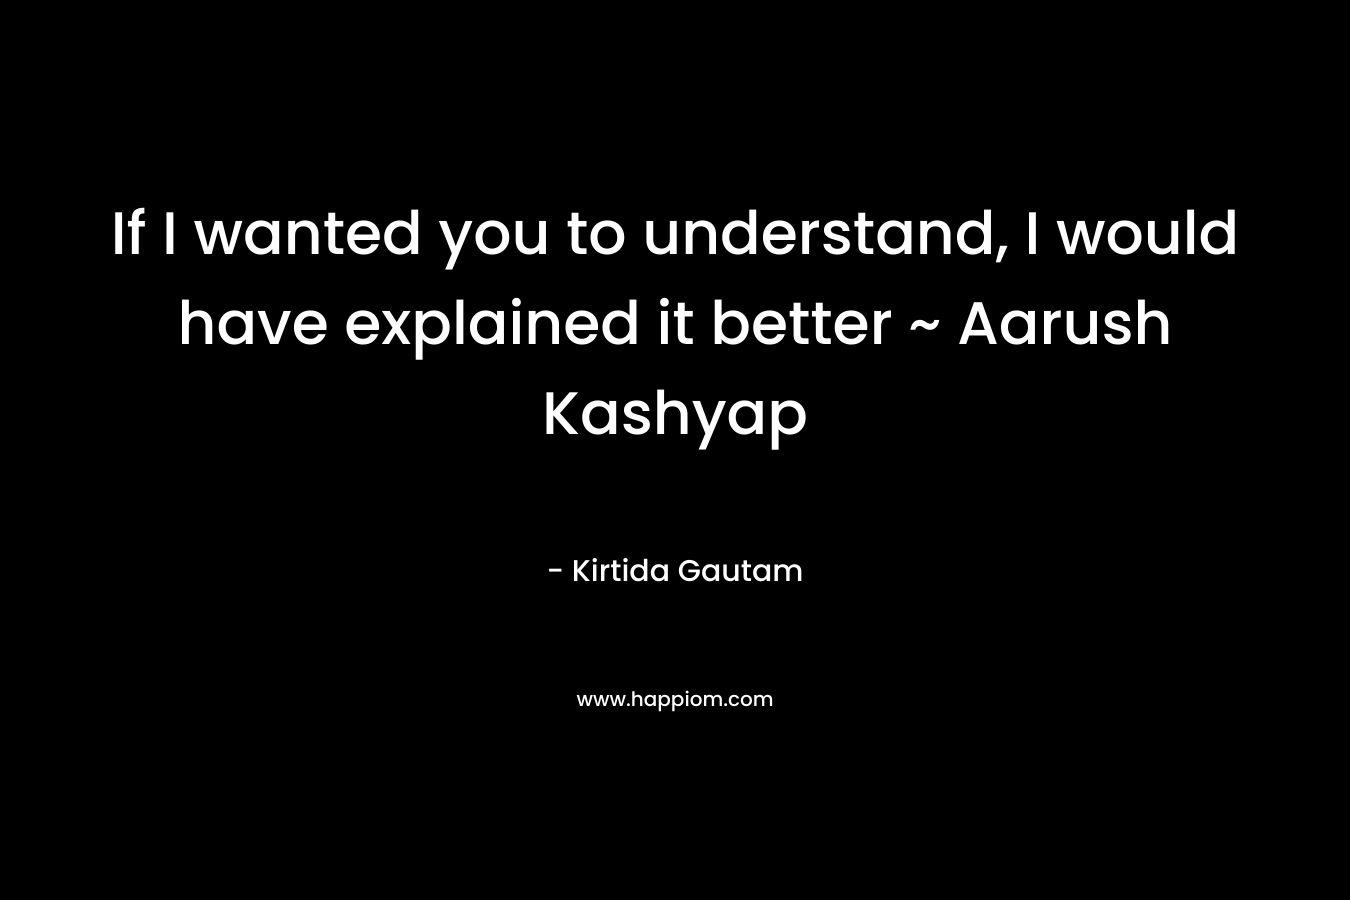 If I wanted you to understand, I would have explained it better ~ Aarush Kashyap